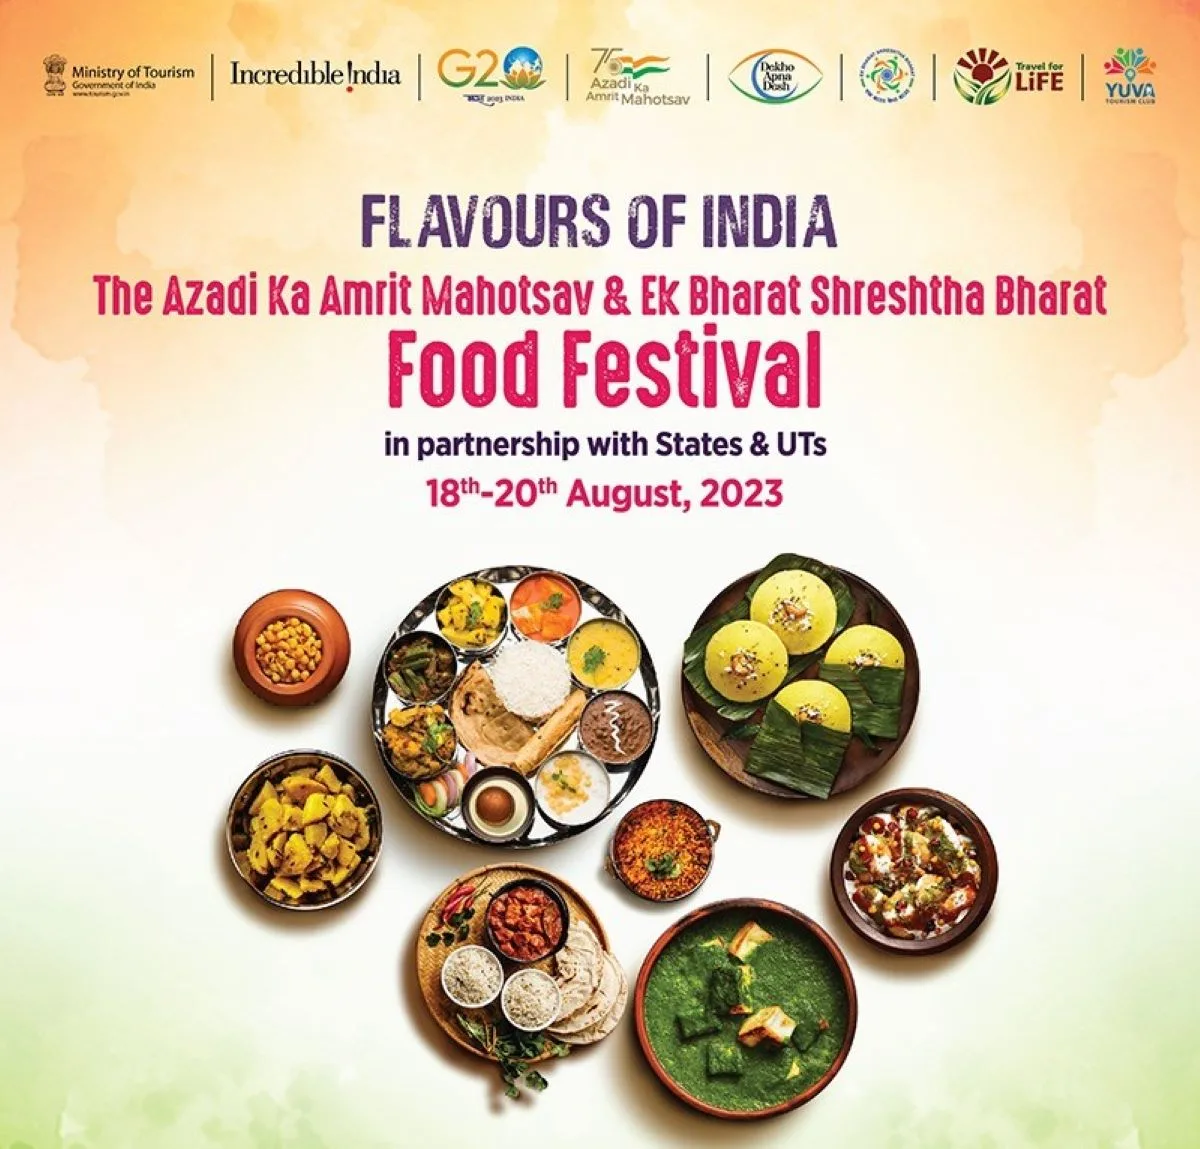 Ministry of Tourism Collaborates with States and UTs to Host Ek Bharat Shrestha Bharat Food Festival